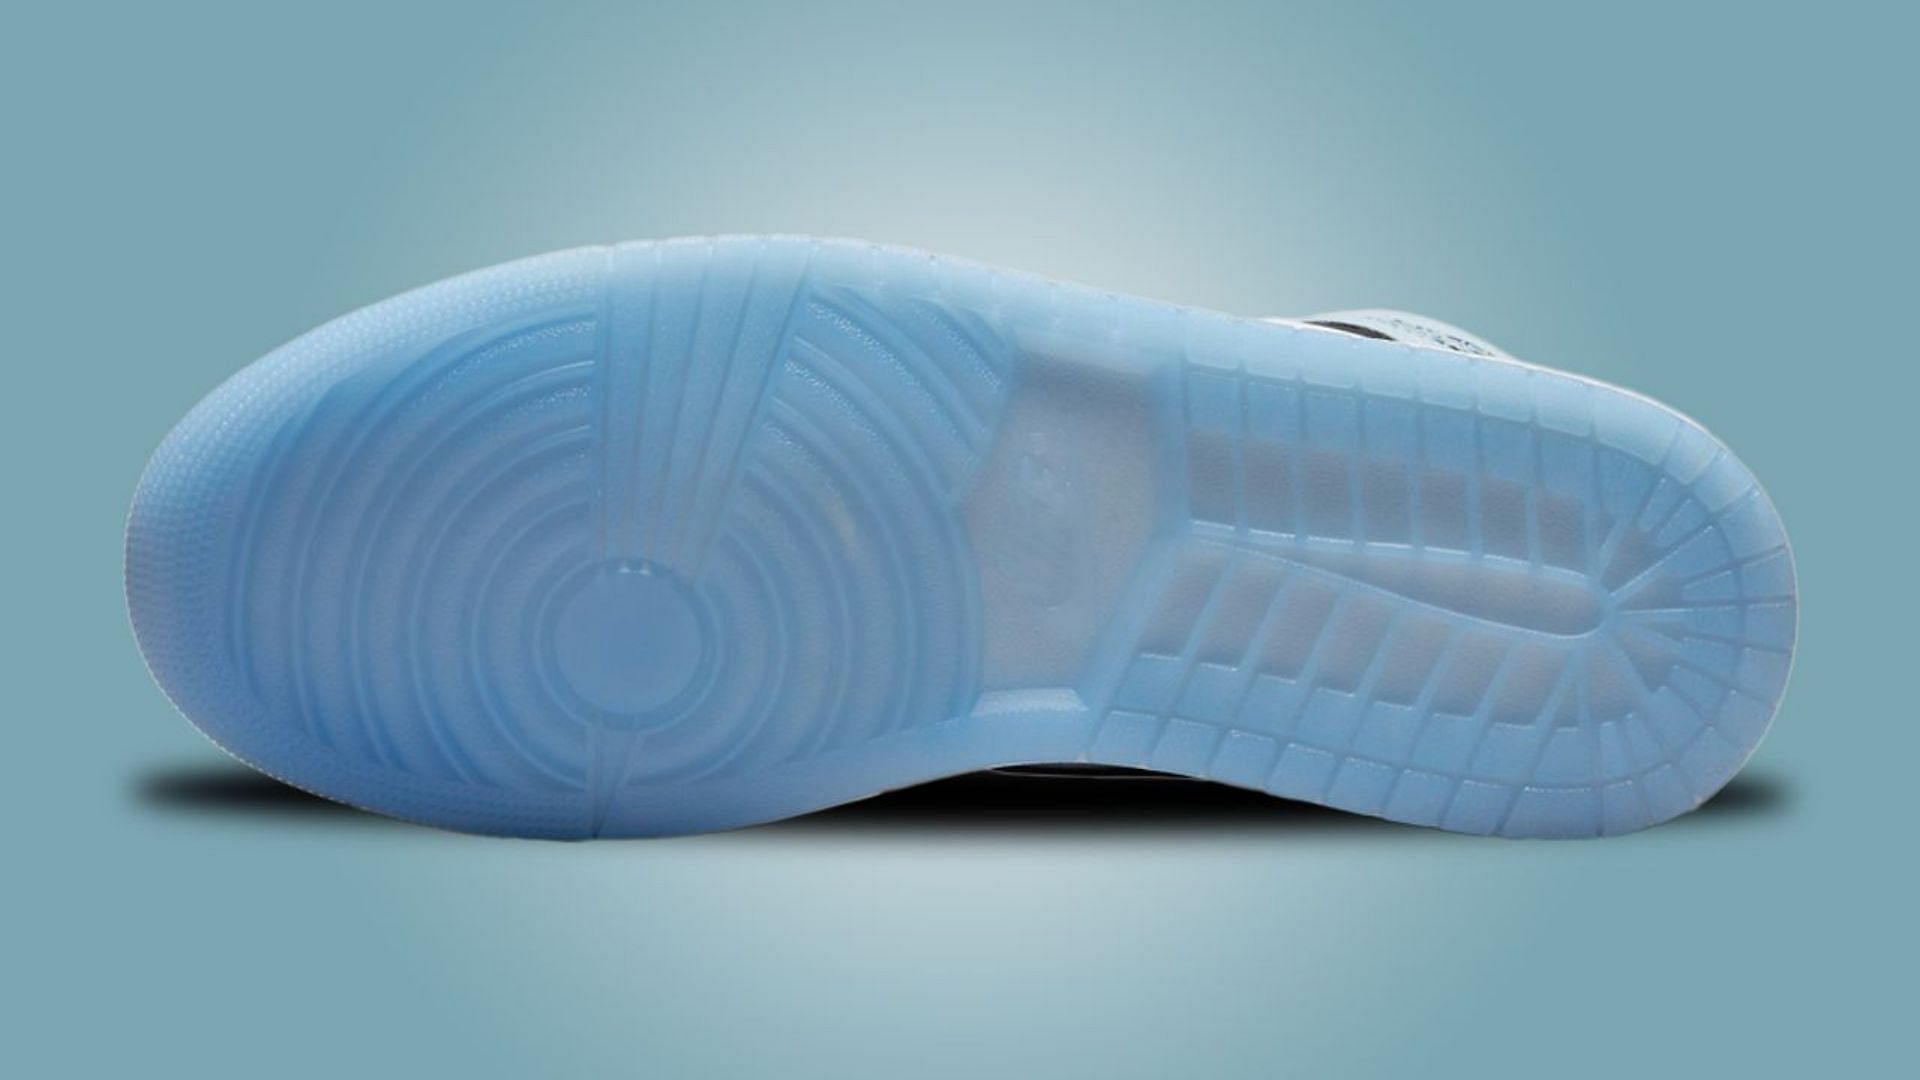 Sole unit of the Air Jordan 1 Mid &quot;Ice Blue&quot; sneakers (Image via Nike)